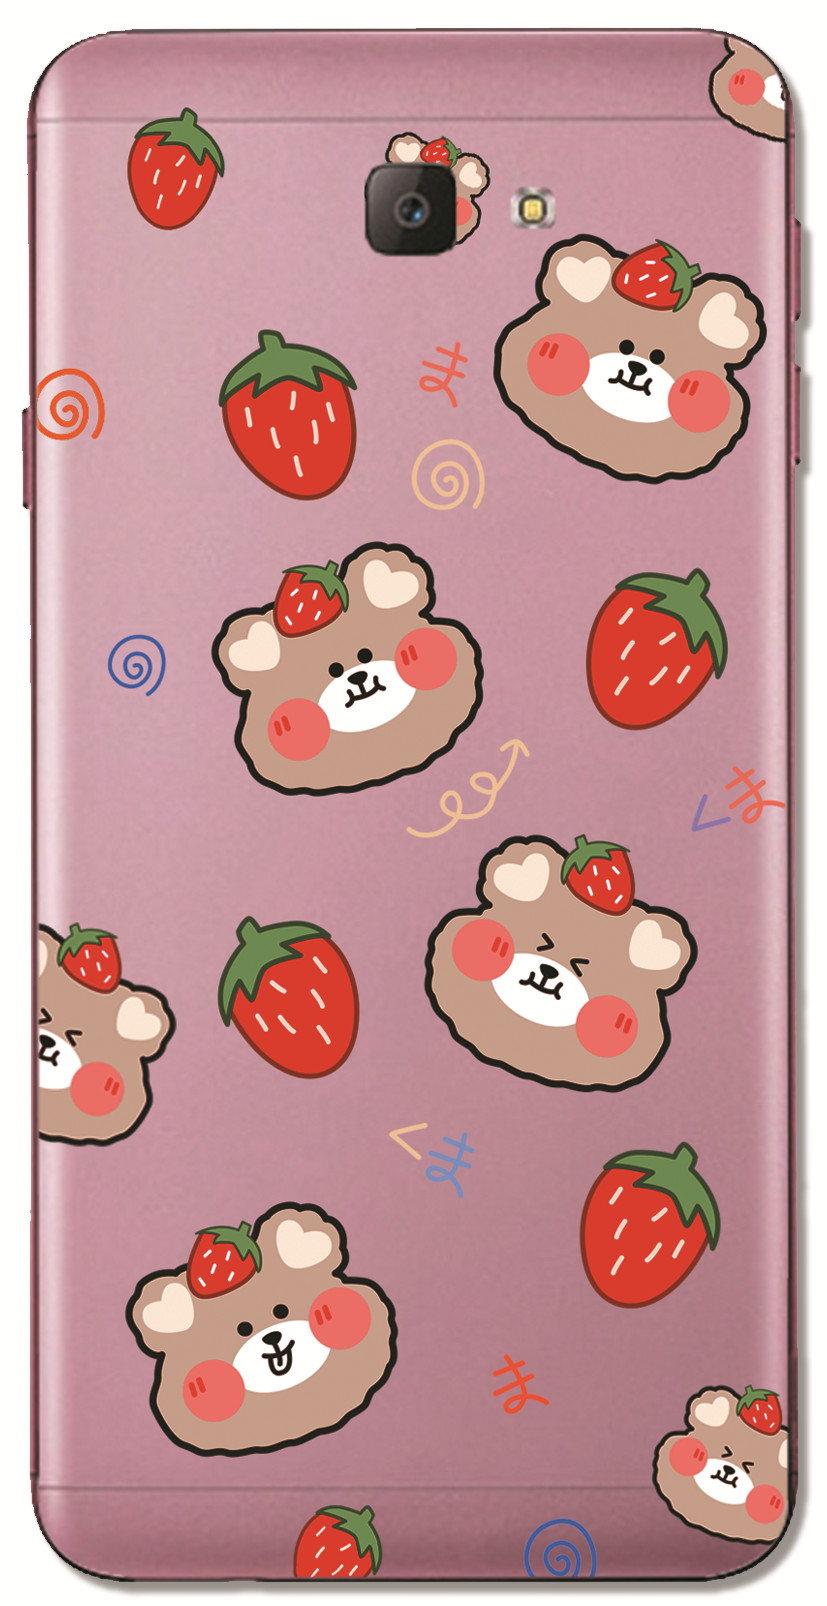 Samsung Galaxy A7 A5 A3 2017/A720 A520 A320 A6S A8S A9 A8 Star INS Cute Cartoon Little brown bear Clear Soft Silicone TPU Phone Casing Lovely astronaut Rocket ship Case Couple Back Cover